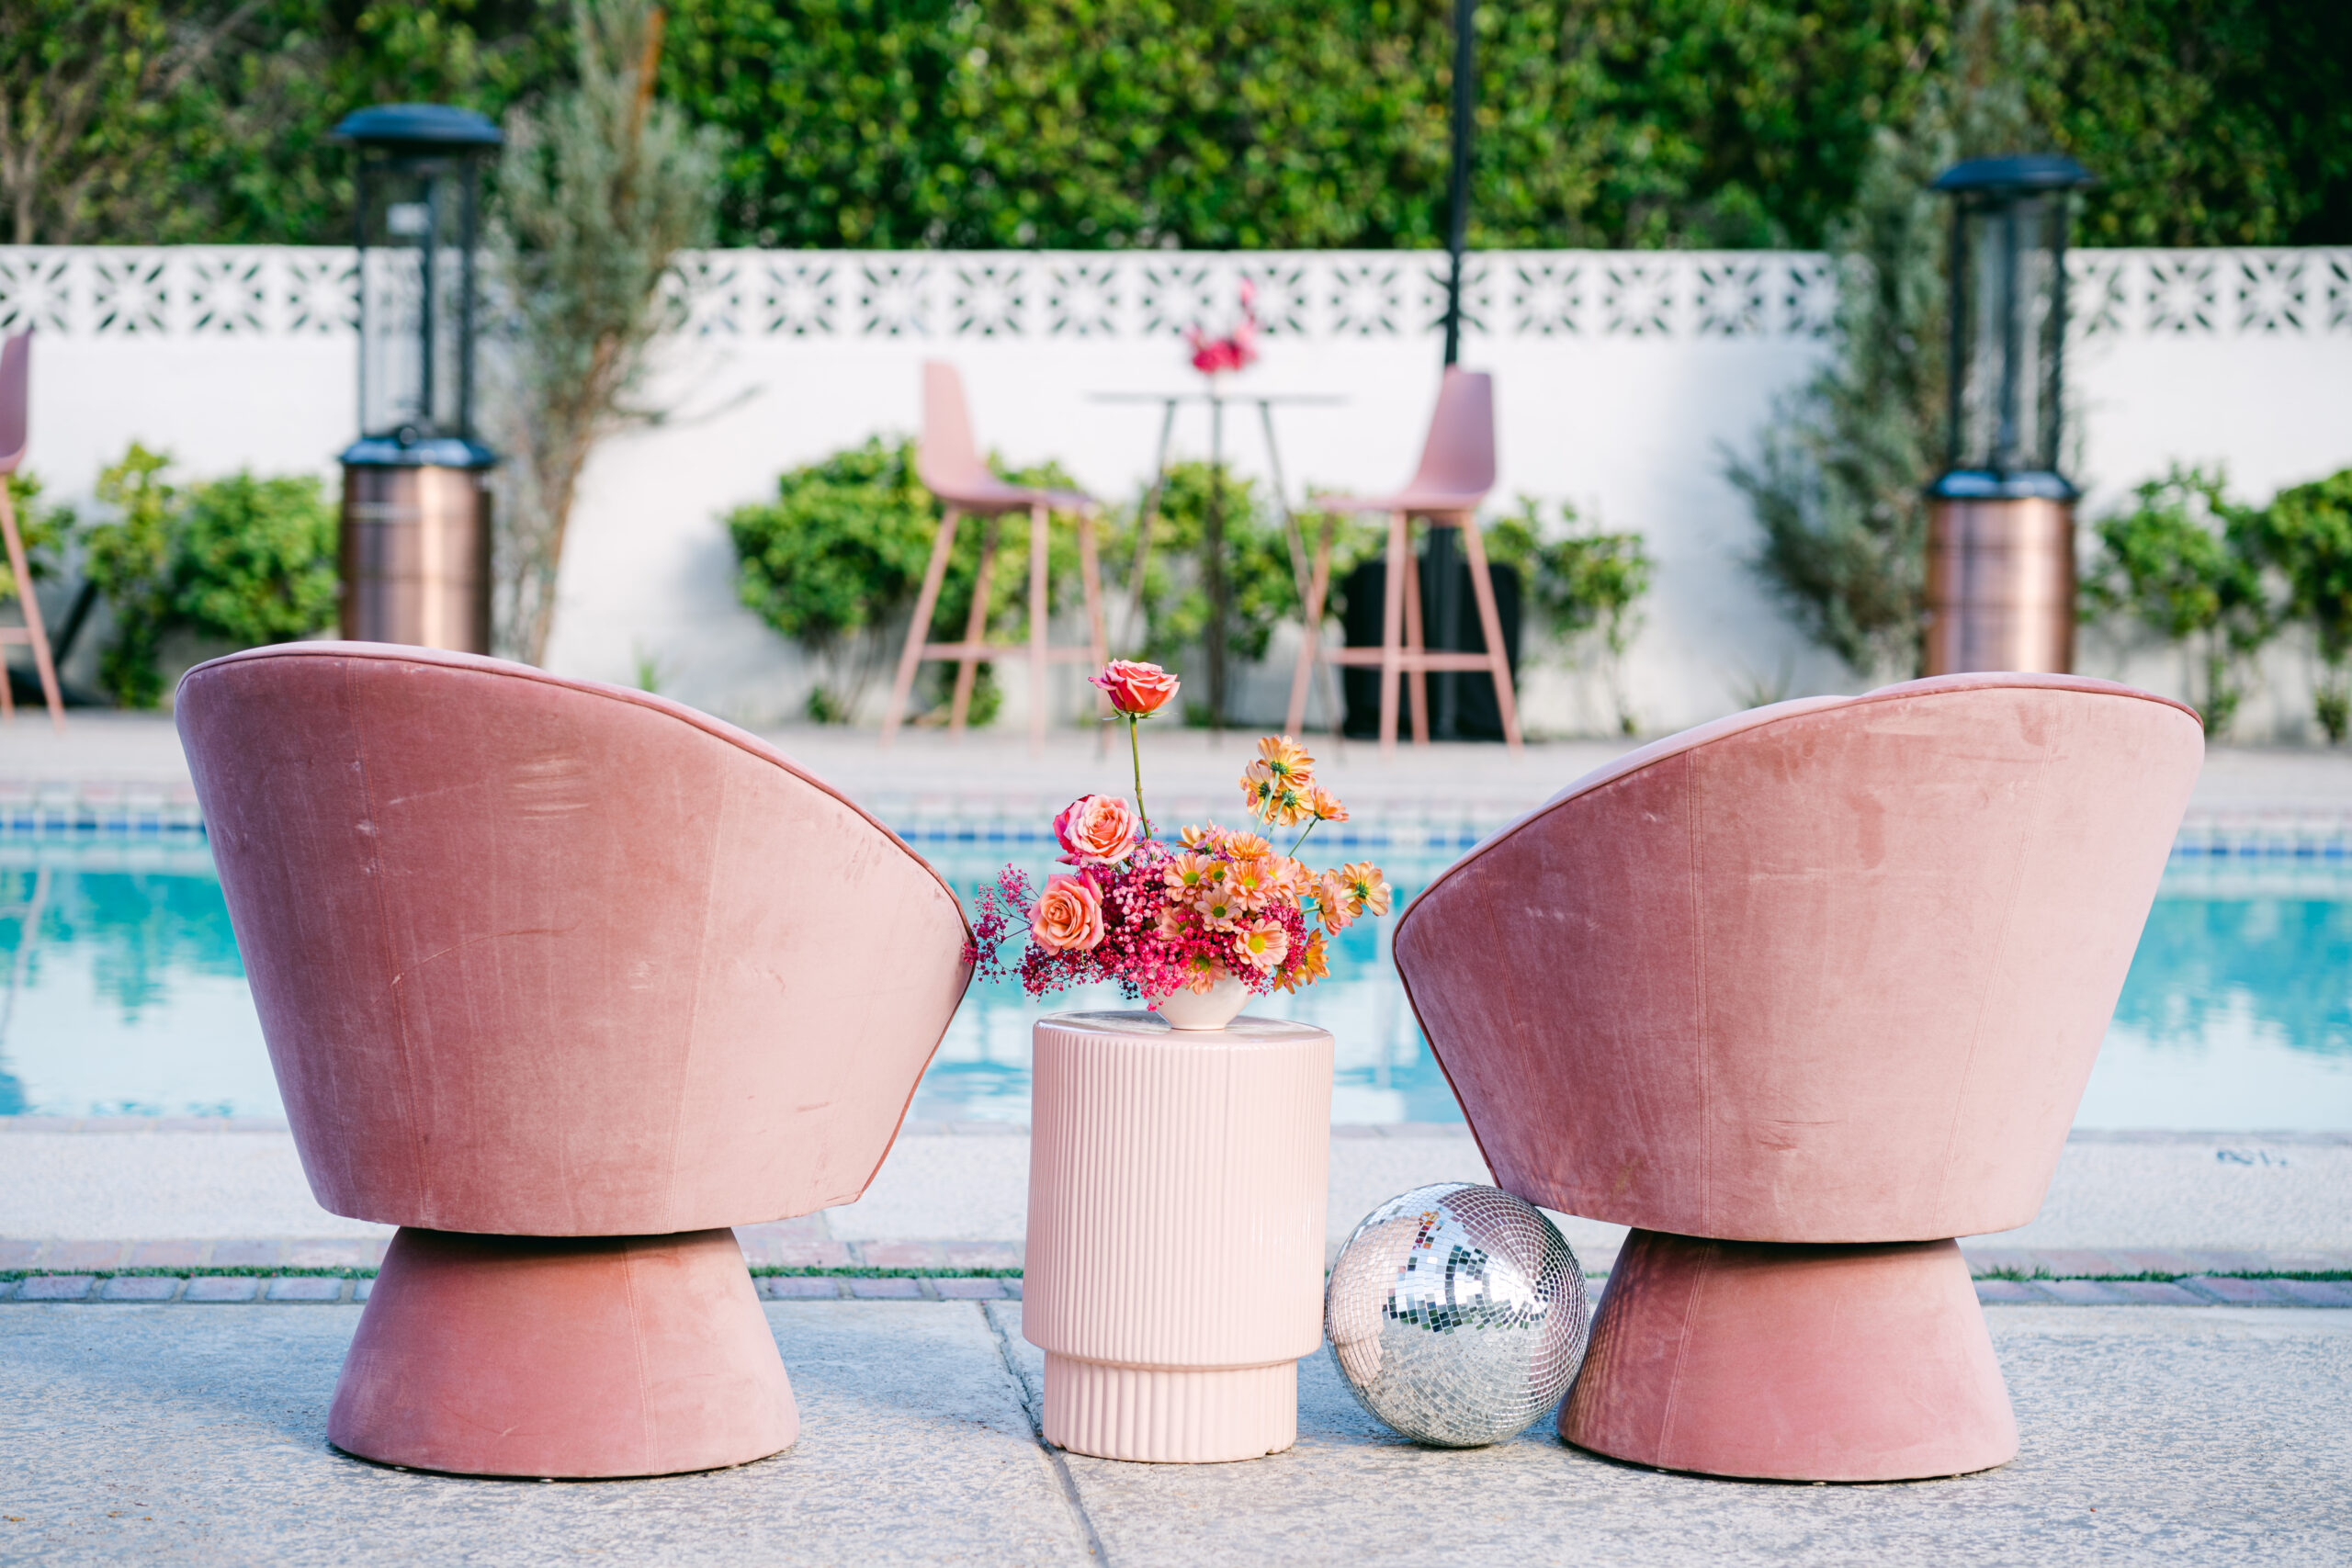 Cocktail hour setup by the pool for the Wedding Planner's Retreat hosted by California Wedding Day at the Ingleside Inn in Palm Springs. Two pink retro chairs on either side of a pink coffee table and floral arrangement, with a disco ball on the ground, designed by Nicole Alexandria Designs and photographed by Kate Noelle Photography